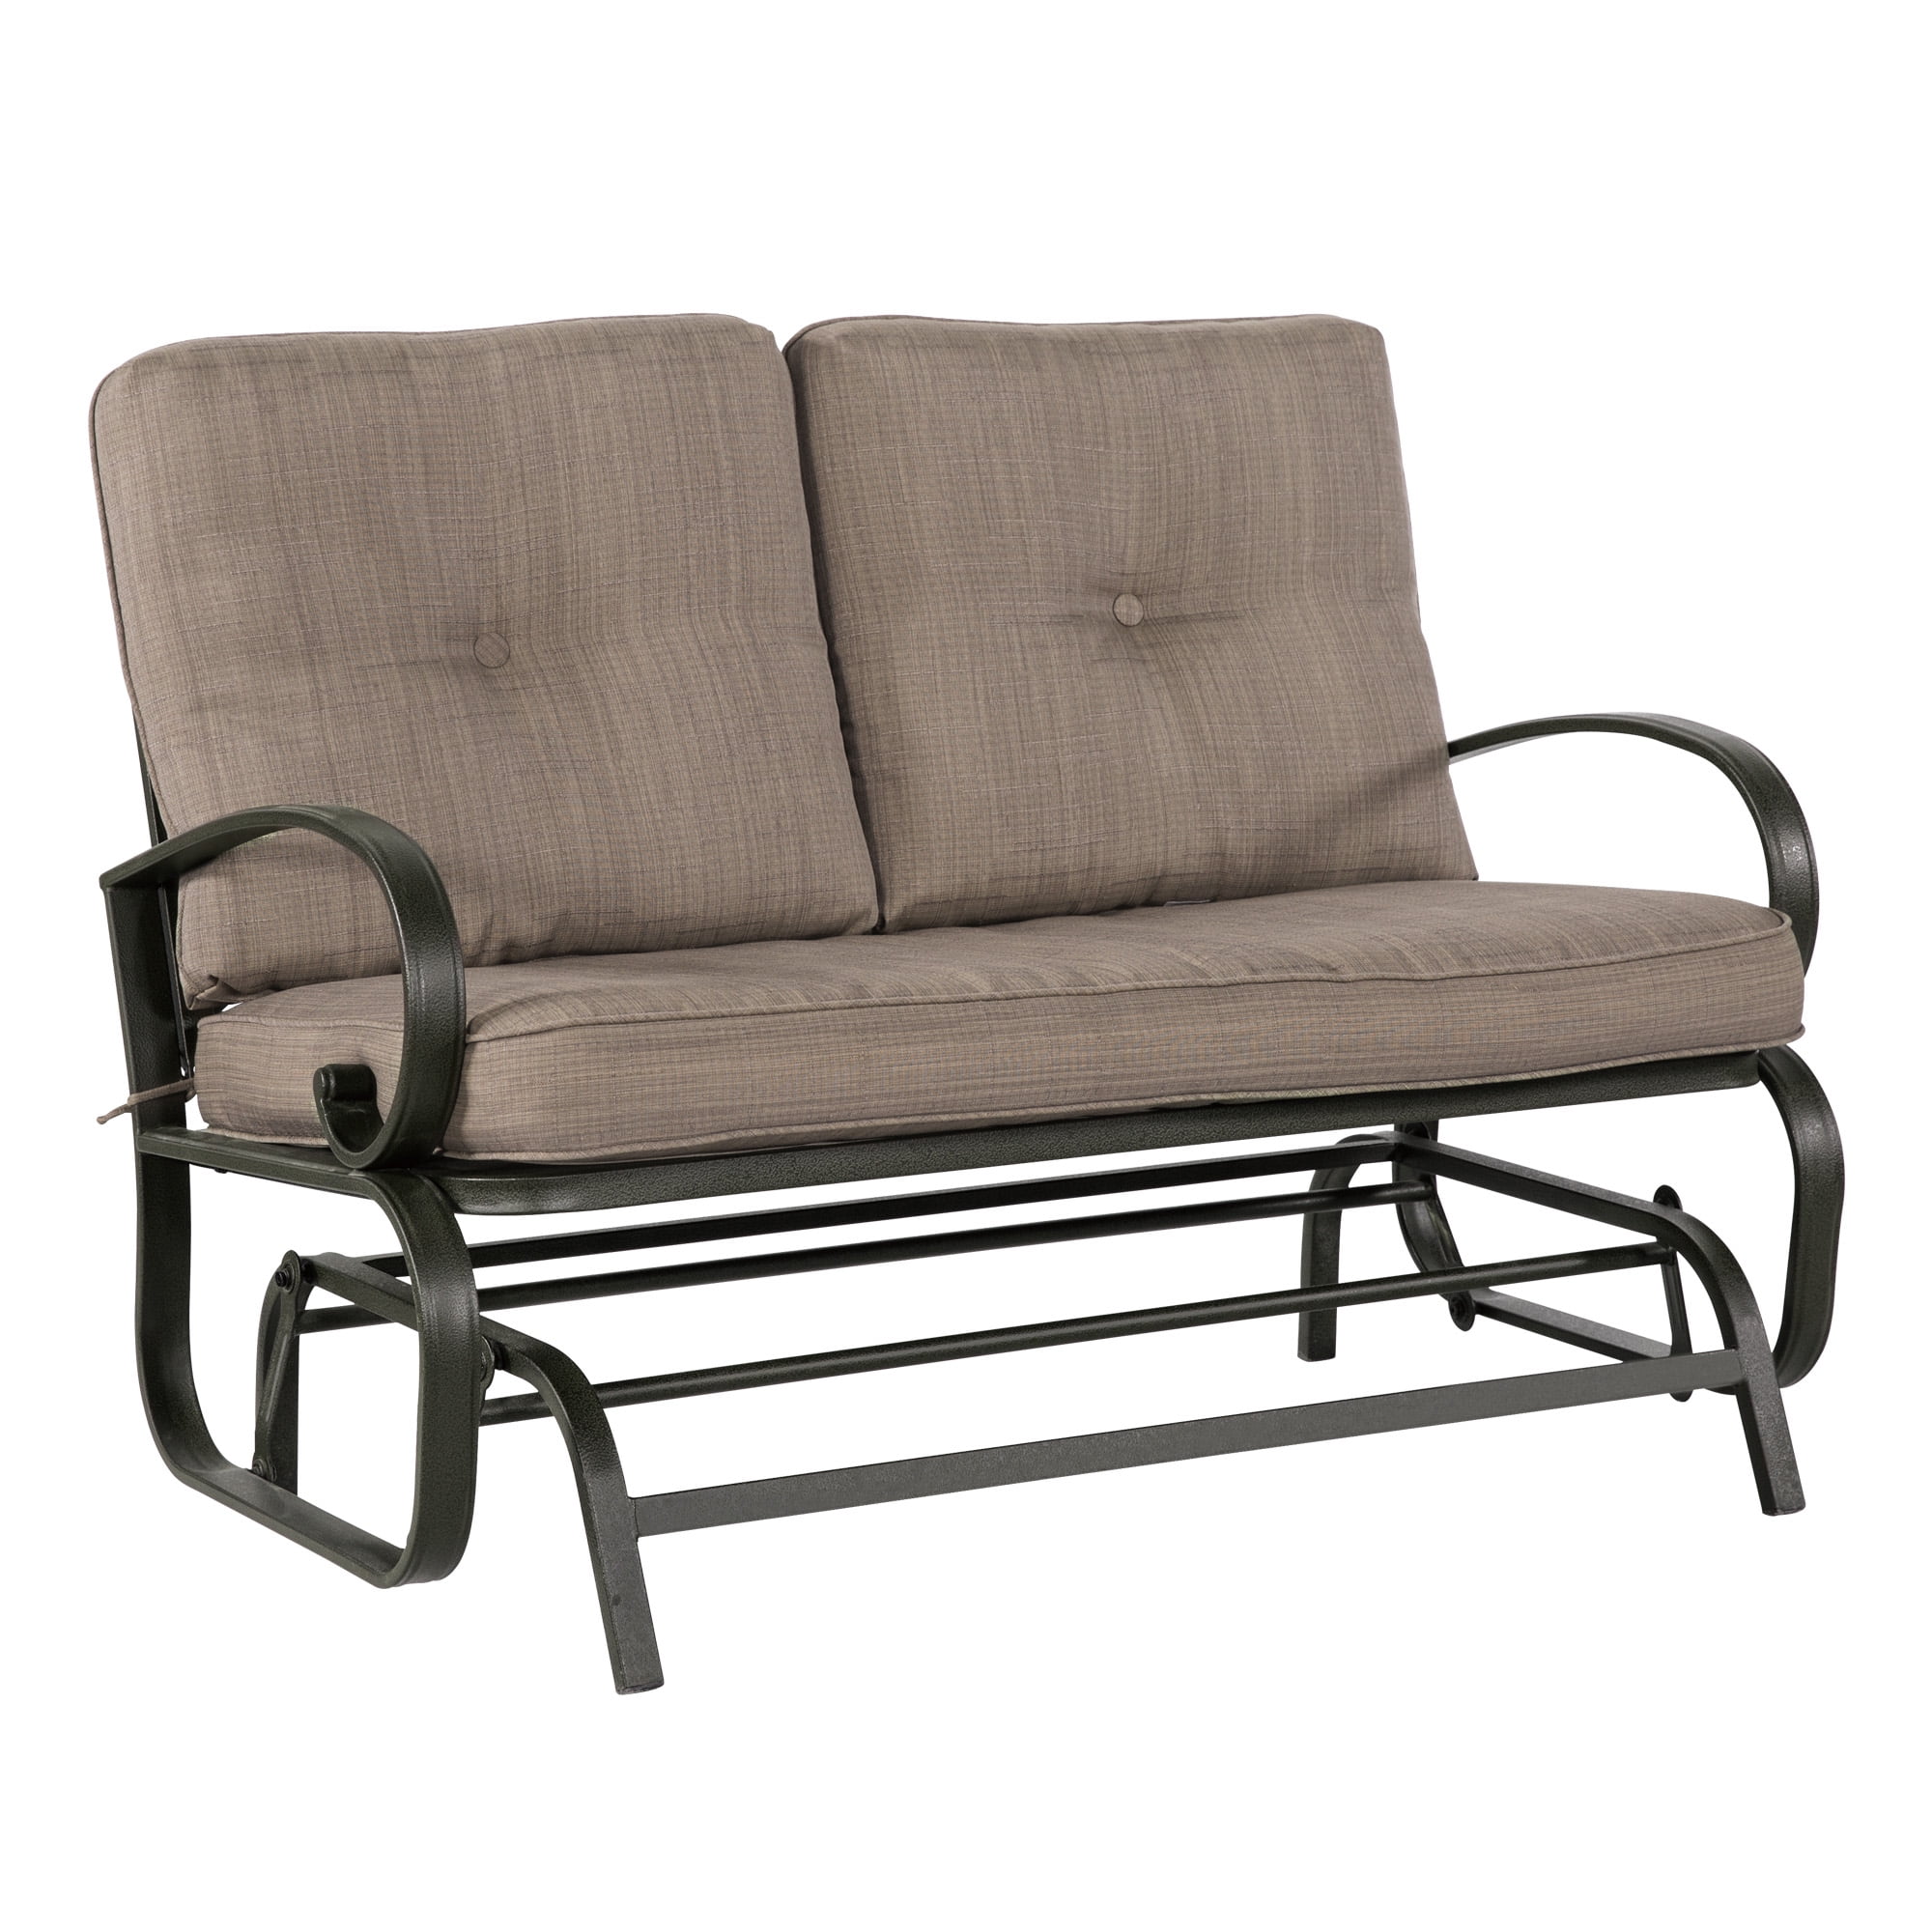 Beige Walsunny Loveseat Outdoor Patio Glider Rocking Bench,Porch Furniture Glider,Wrought Iron Chair Set with Cushion 